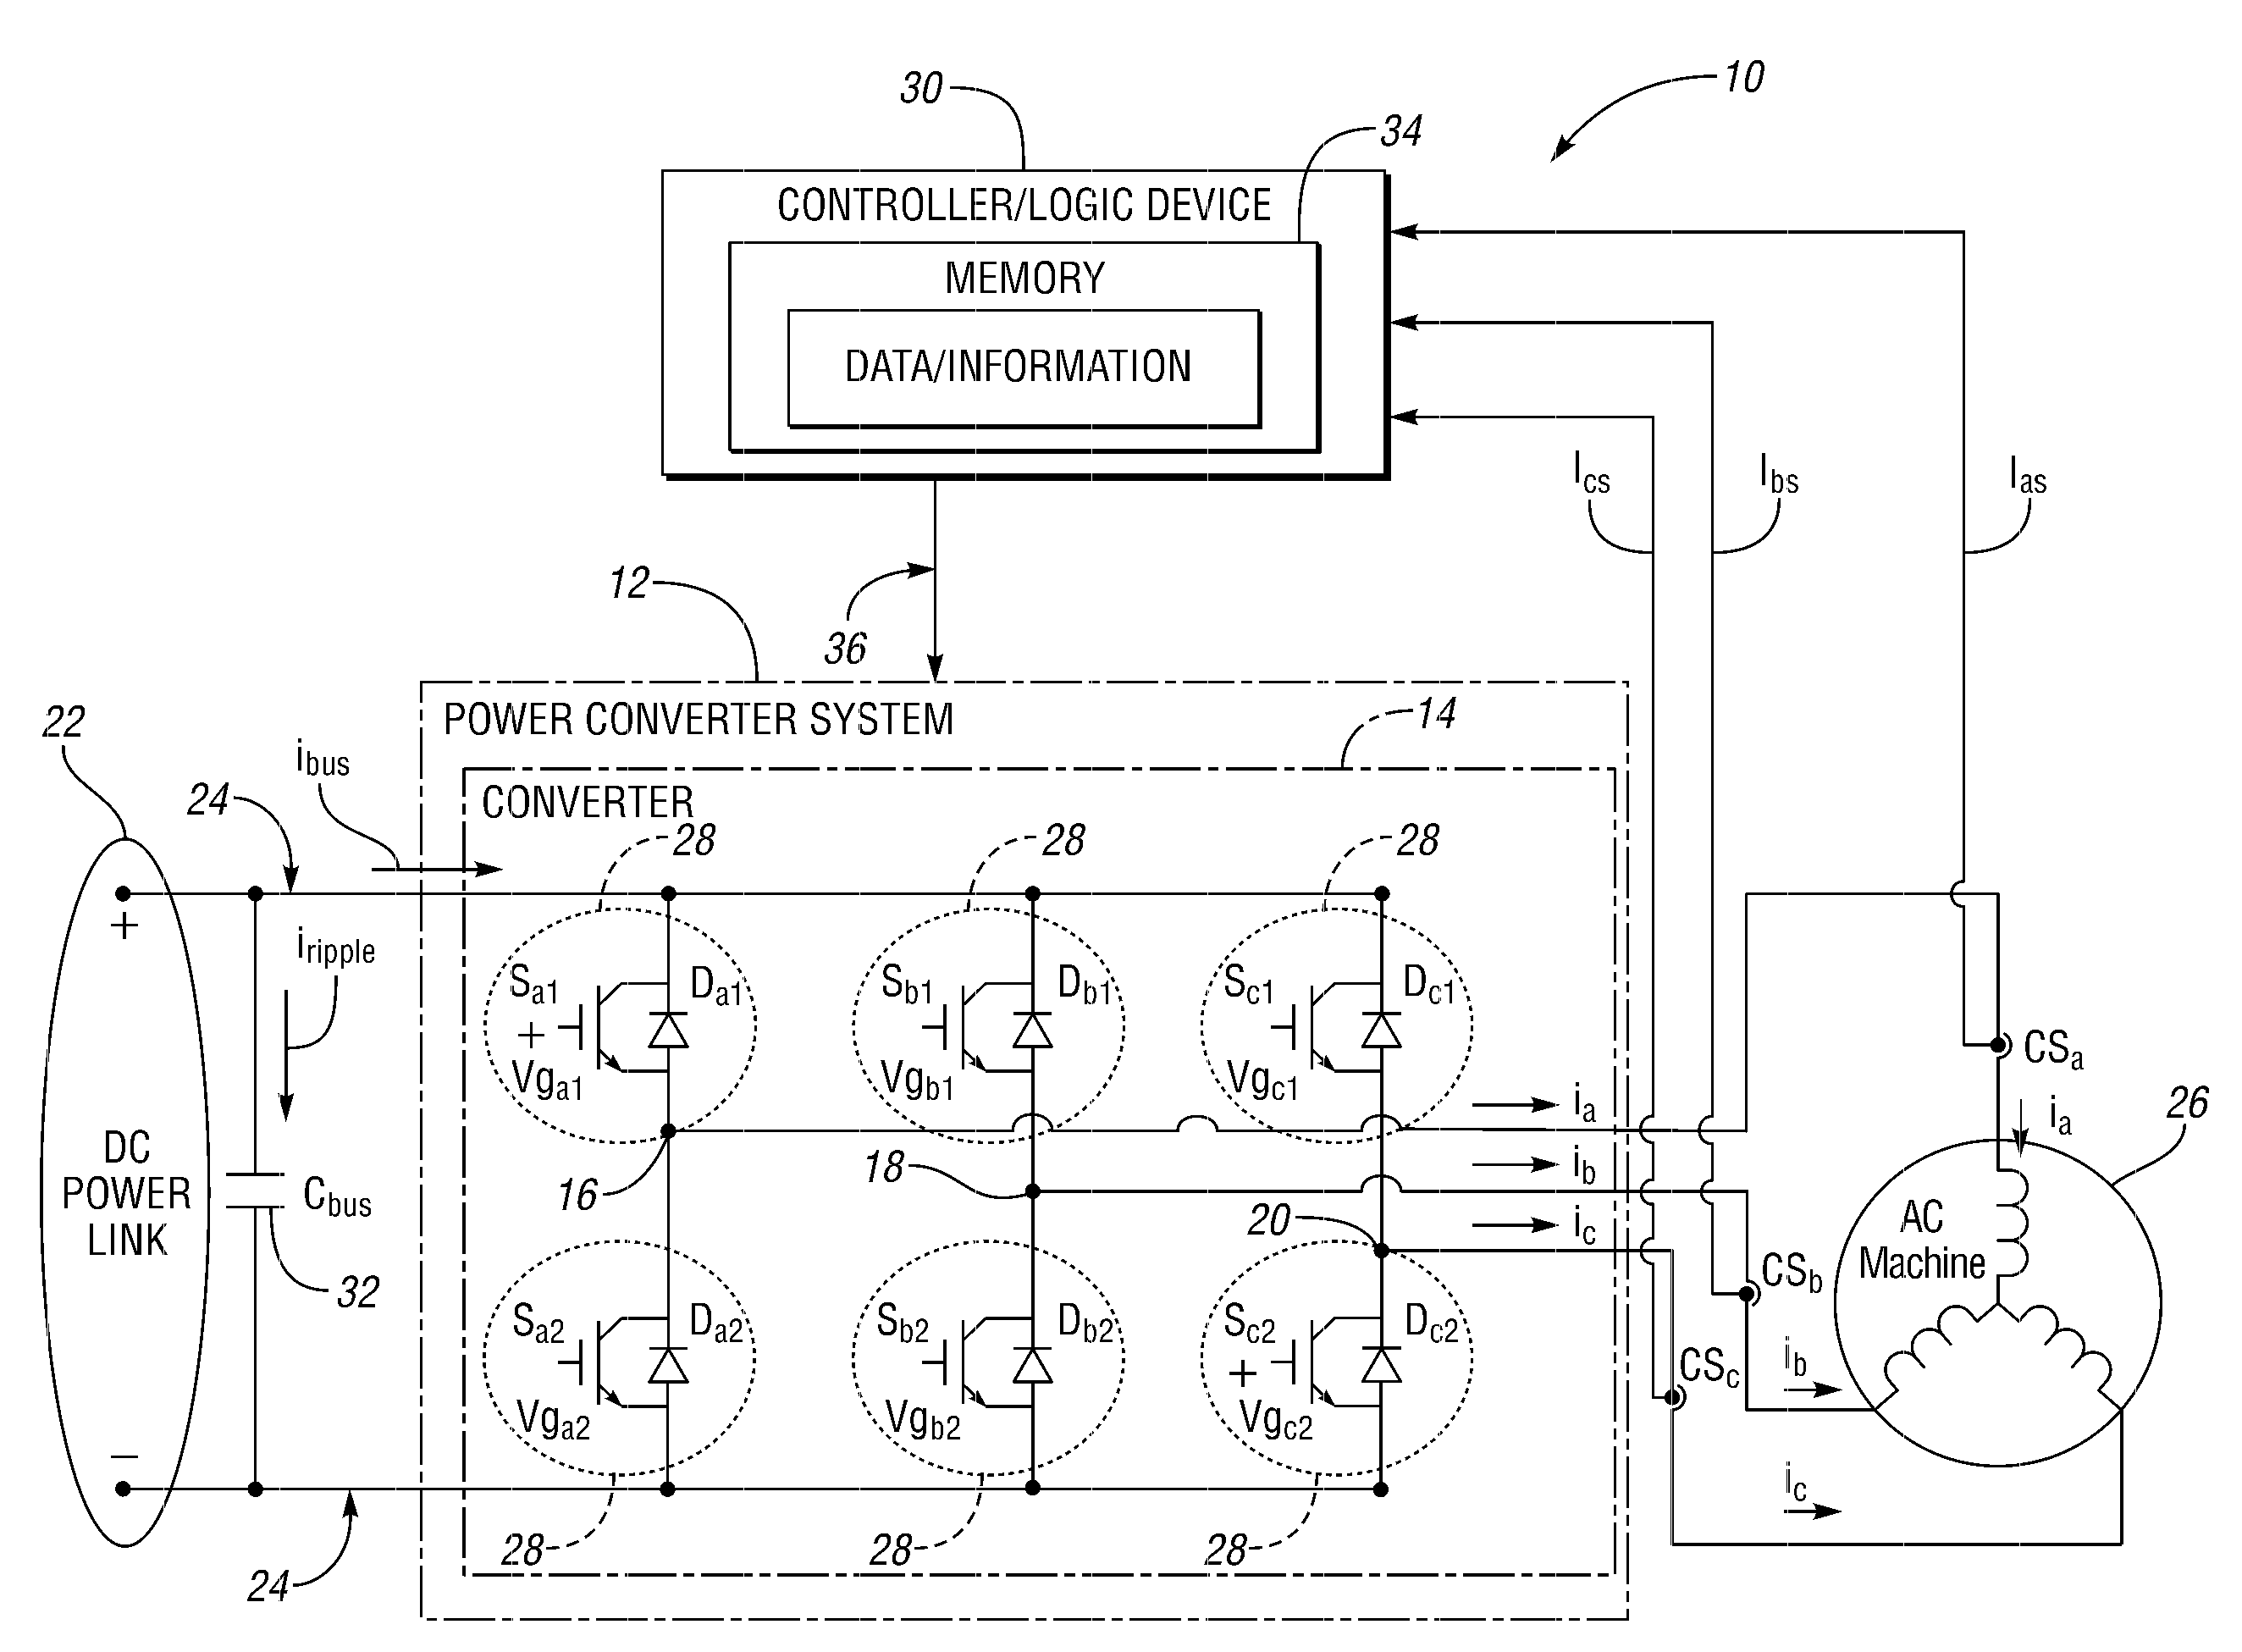 Method And System For Controlling A Power Converter System Connected To A DC-BUS Capacitor